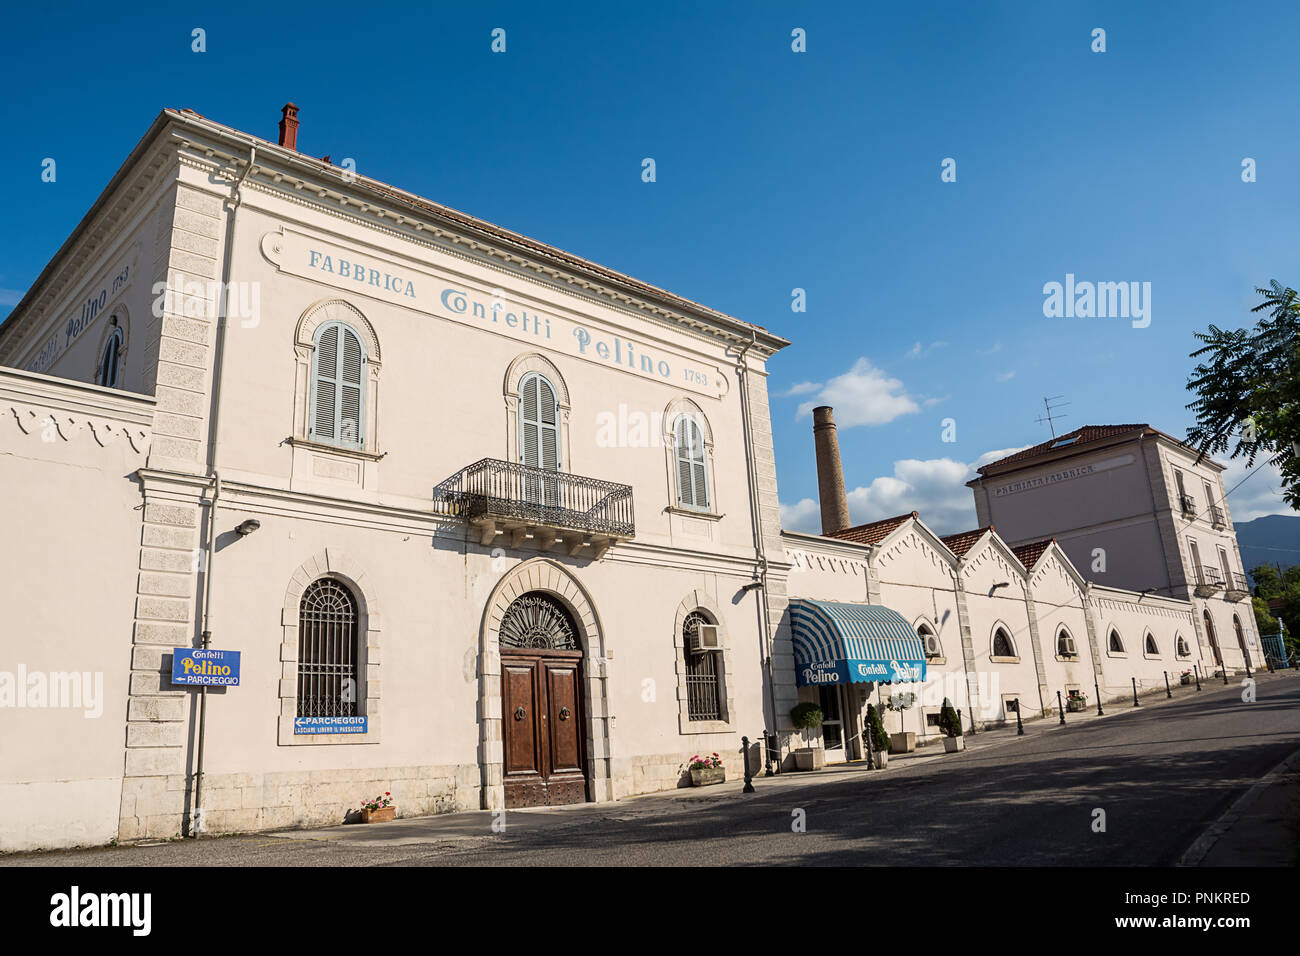 Sulmona, Italy - 23 june 2018: External facade of the old Pelino confetti factory in Sulmona without anyone Stock Photo